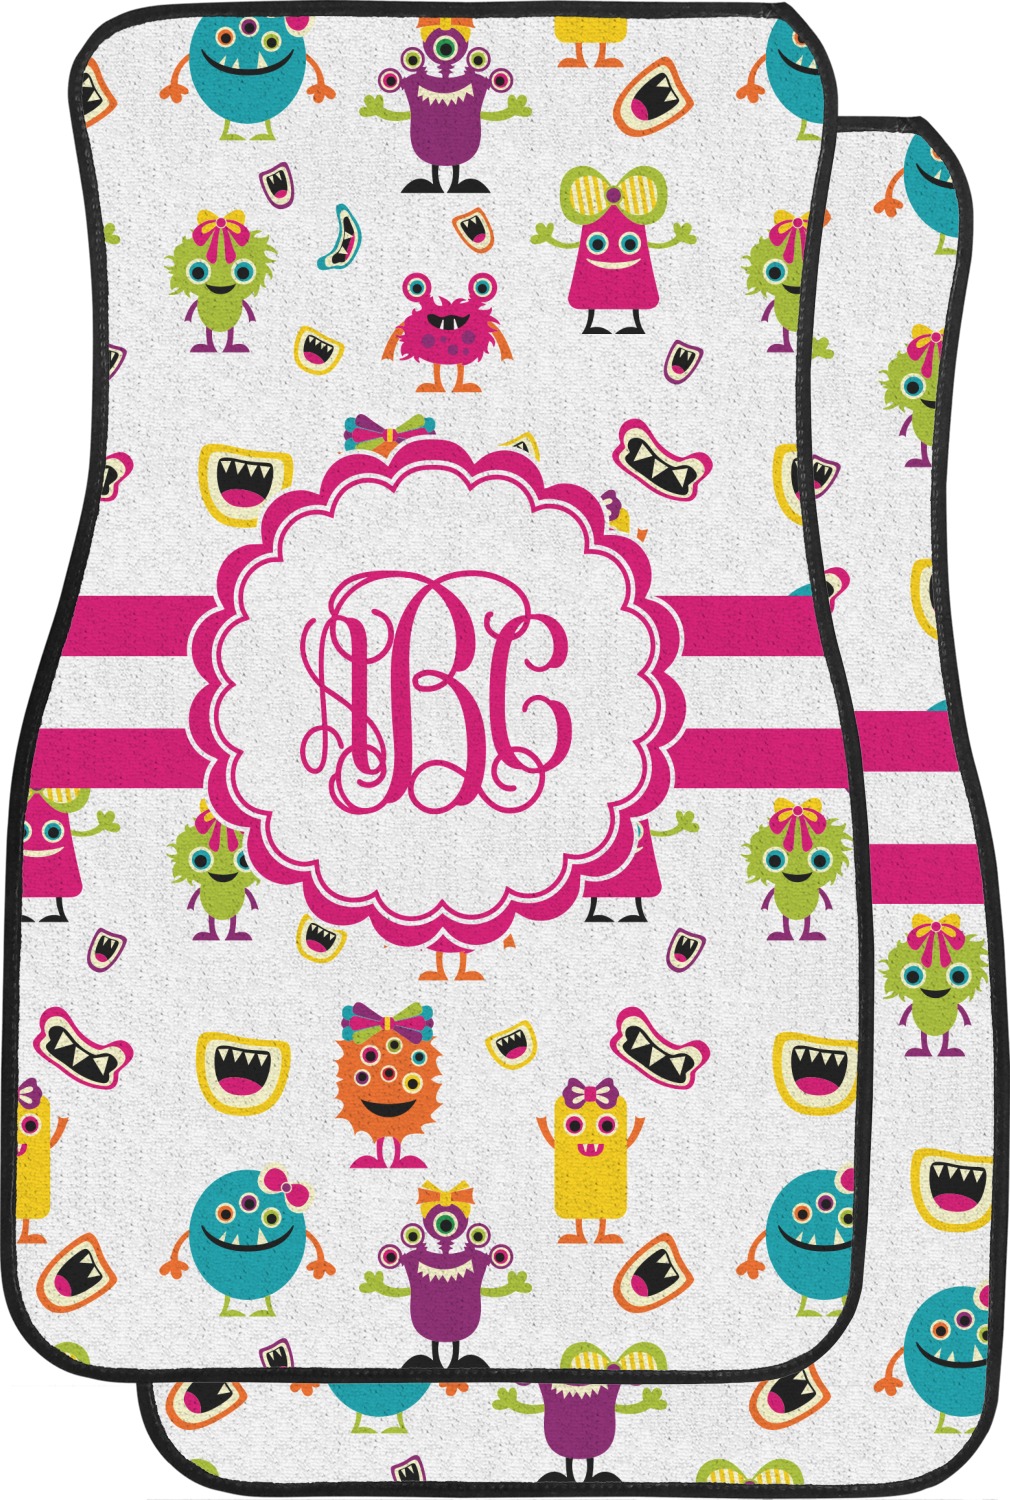 Girly Monsters Car Floor Mats Front Seat Personalized